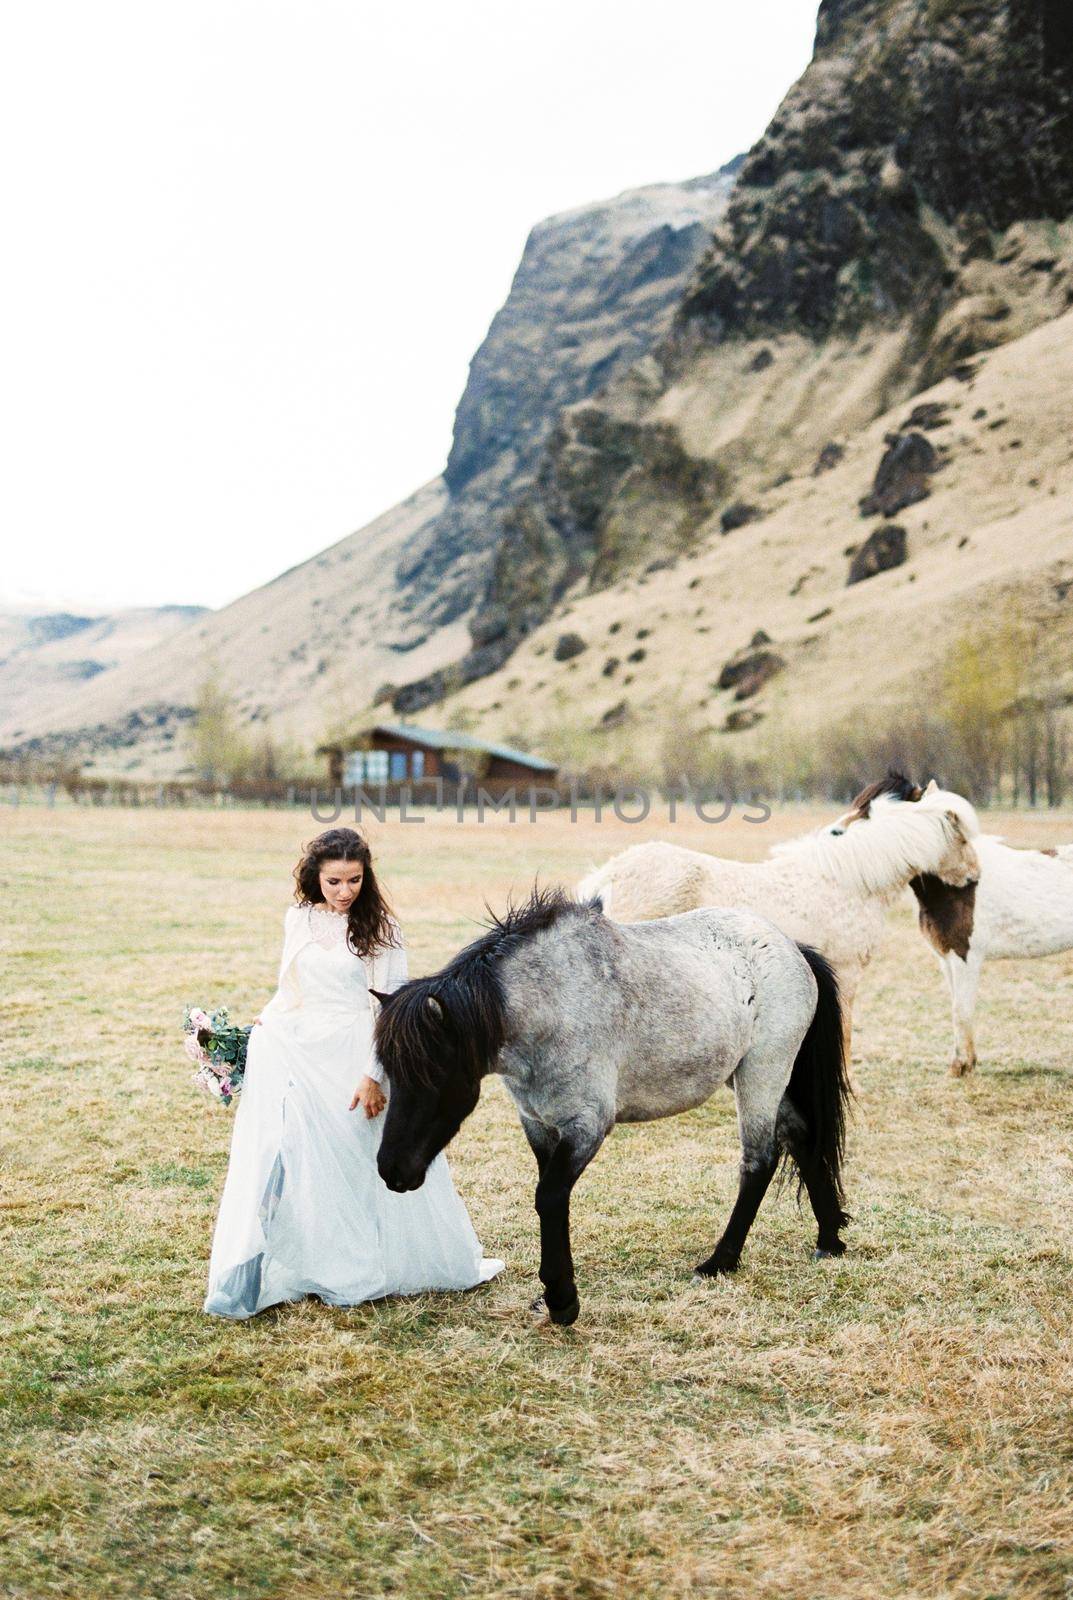 Bride with a bouquet stands near the horse in the pasture. High quality photo